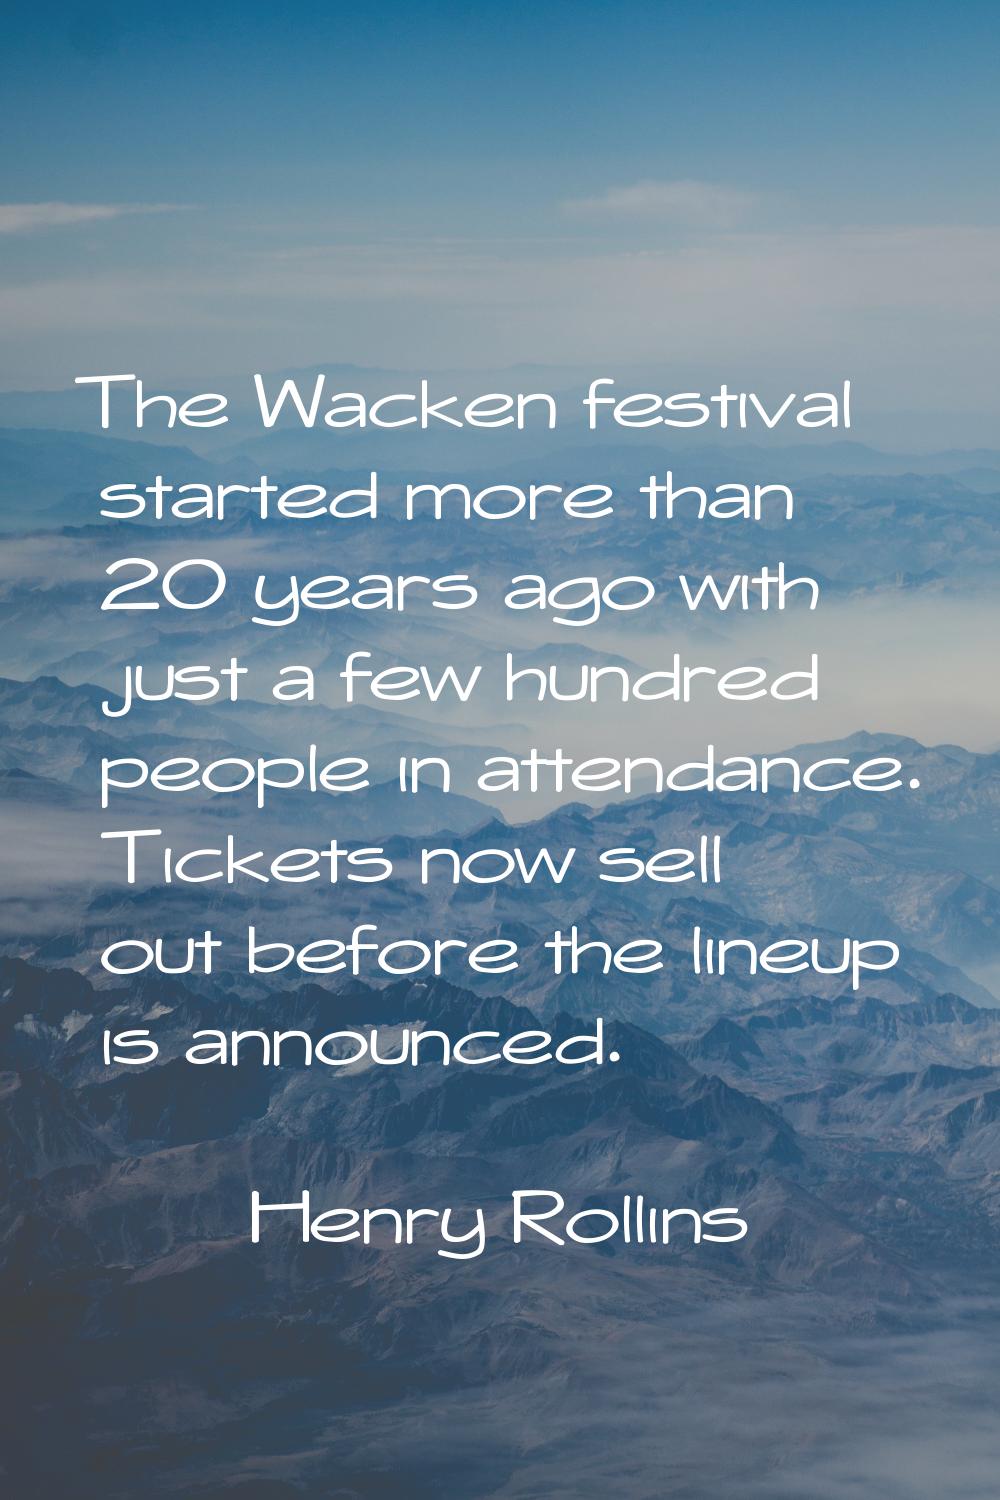 The Wacken festival started more than 20 years ago with just a few hundred people in attendance. Ti